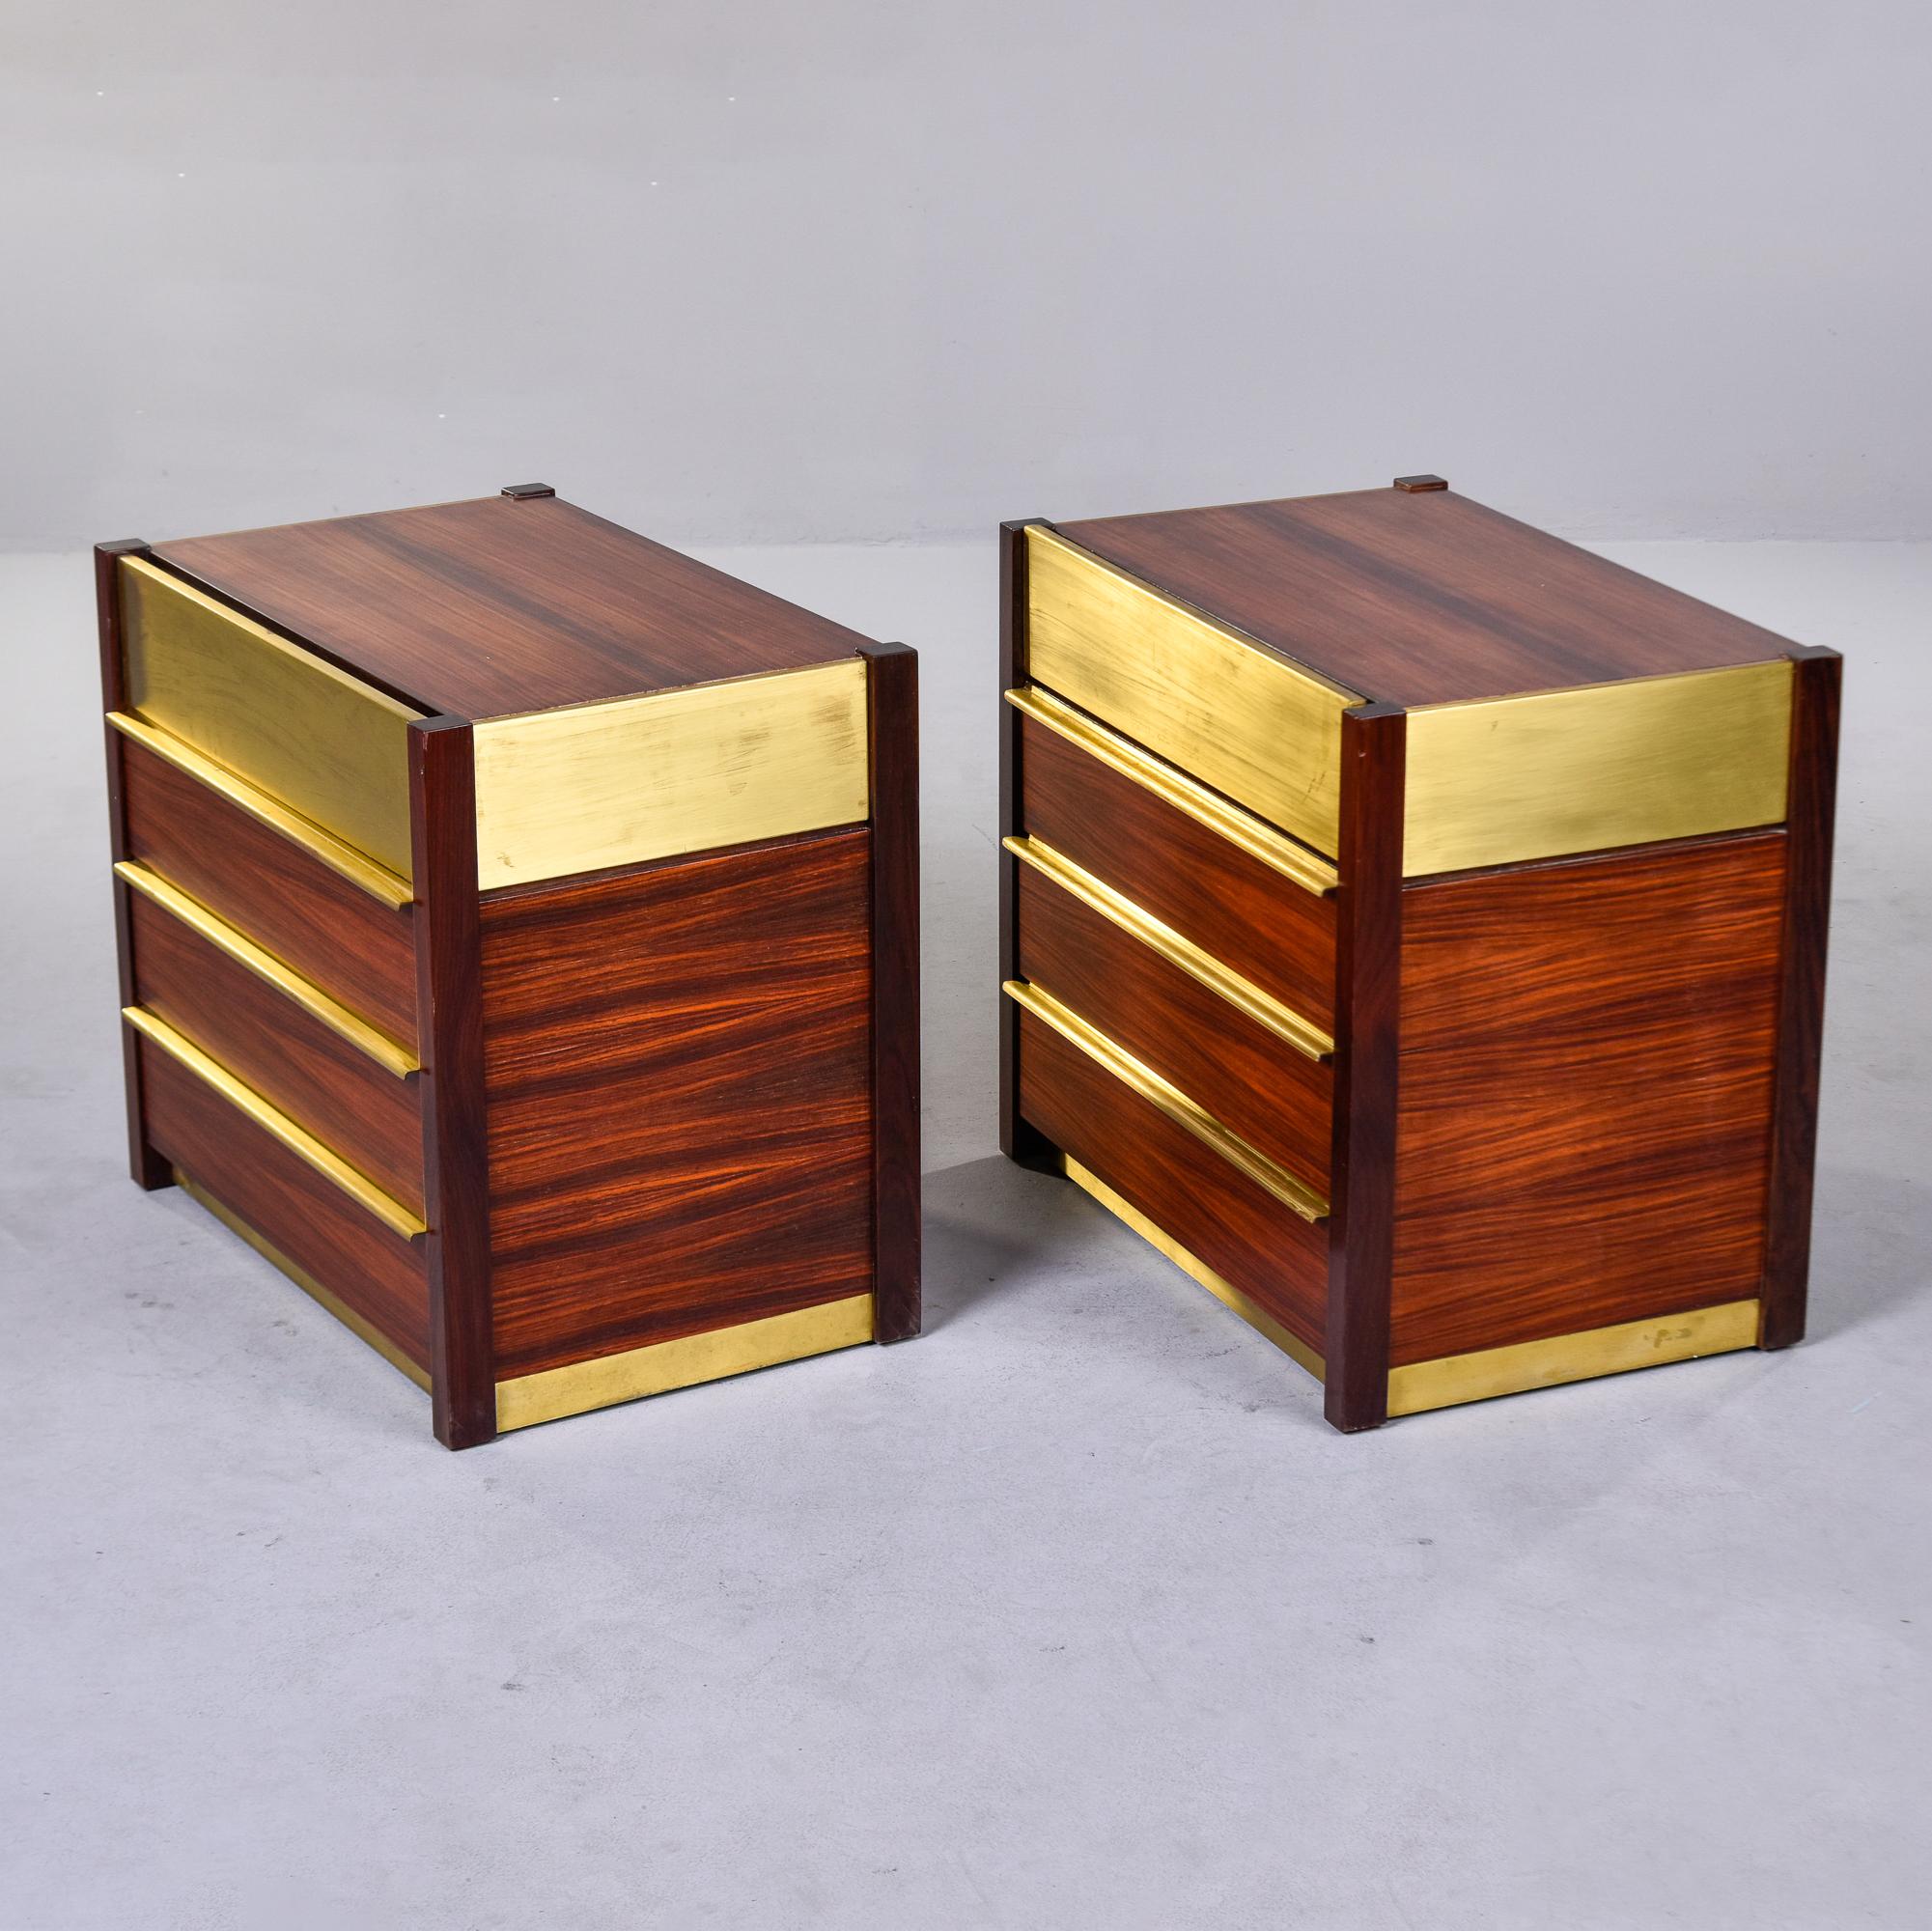 Found in Italy, this pair of brass and rosewood chests date from the 1970s. Each chest has four functional drawers with dovetail construction and brass pulls. Top drawer has brass front and there are brass accents on the sides at the base and tops.